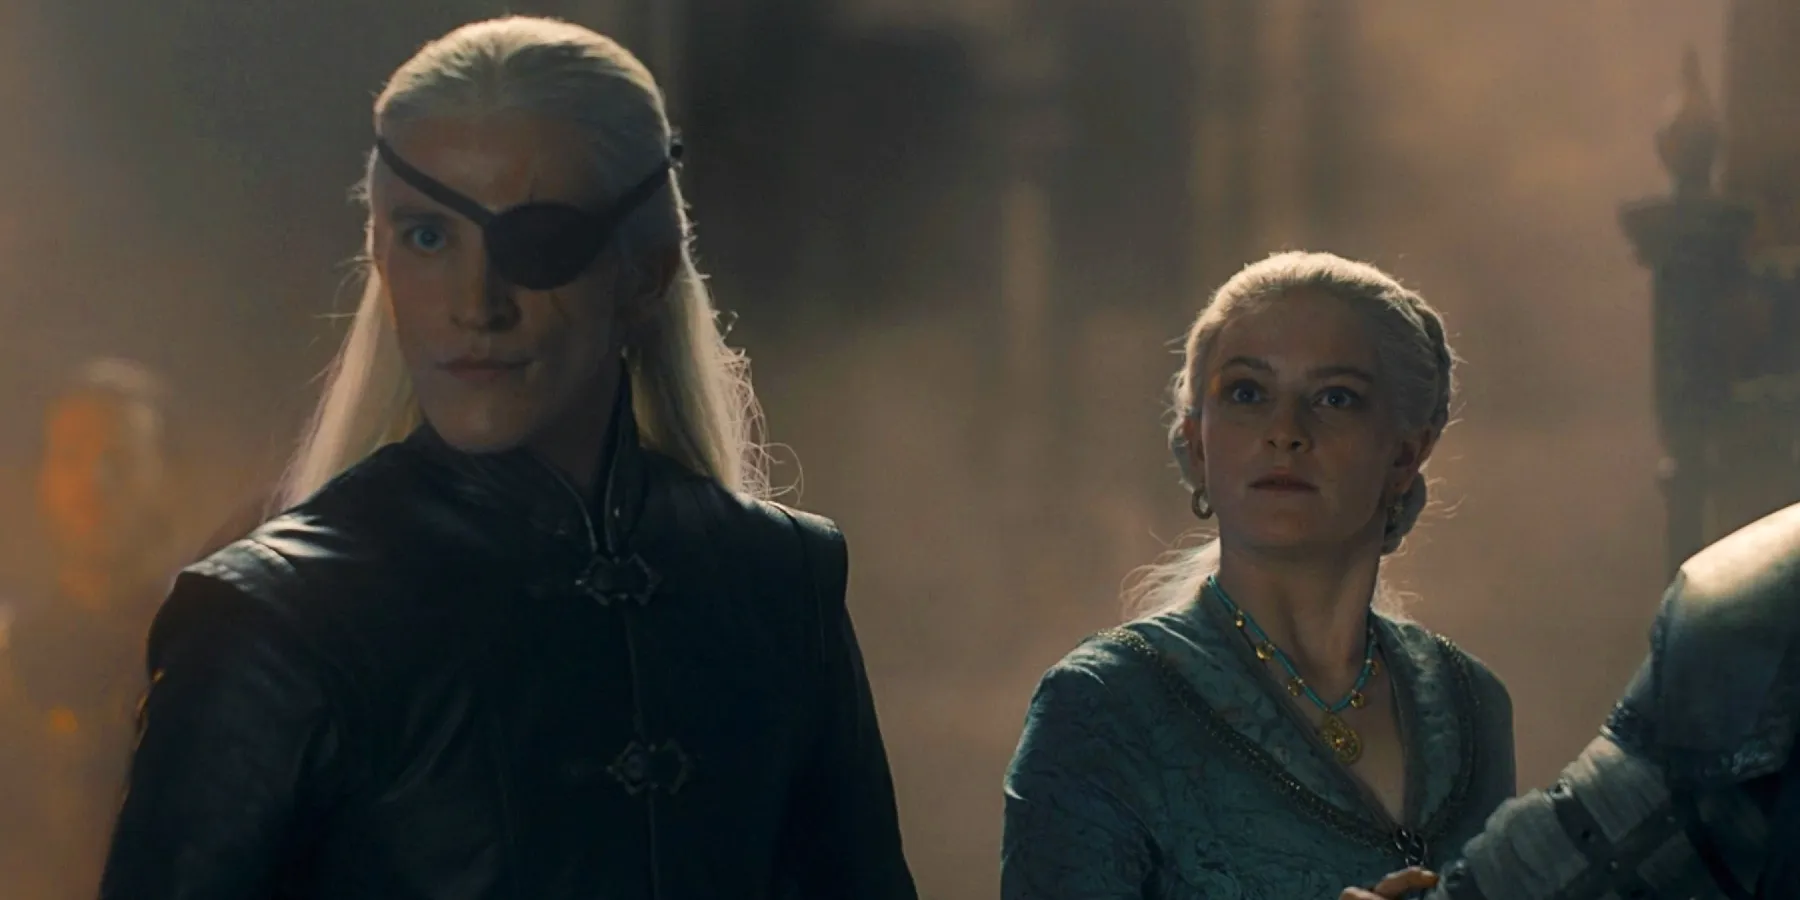 Helaena and Aemond in House of the Dragon